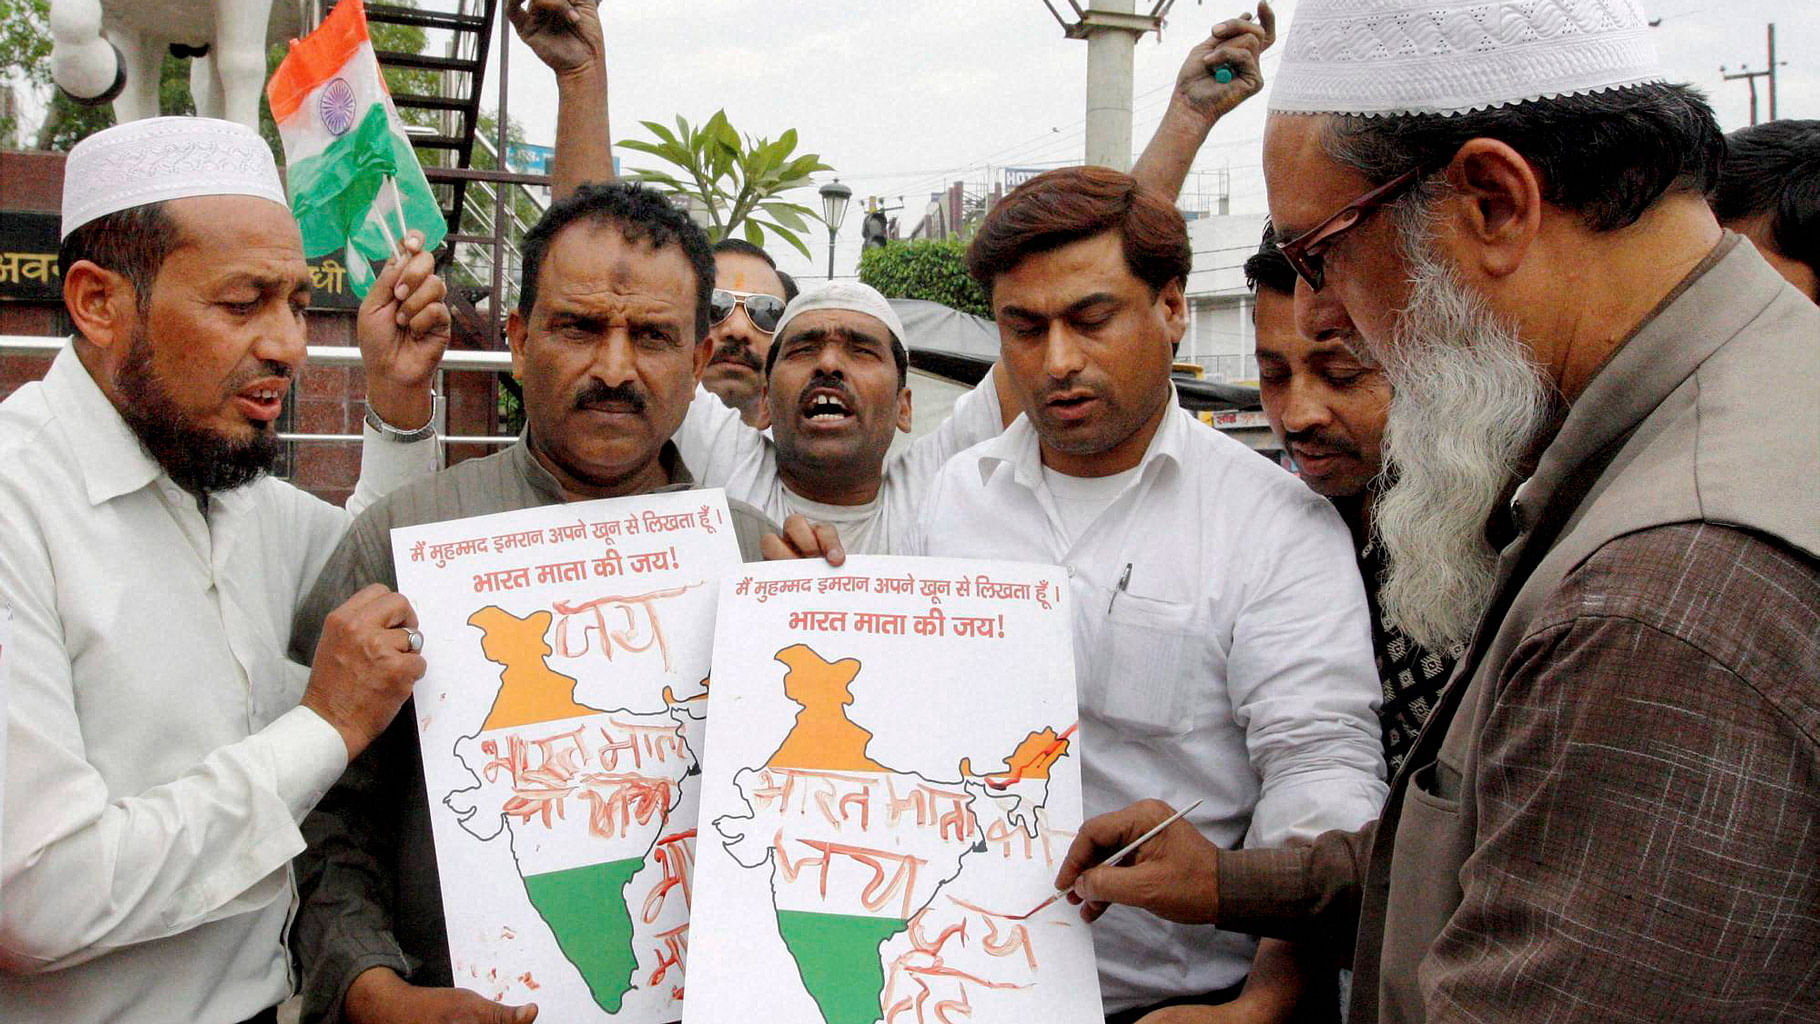 

People from Muslim community write <i>Bharat Mata ki Jai</i> with their blood as a way to show their disapproval with AIMIMs chief Asaduddin Owaisis recent comment. (Photo: PTI)